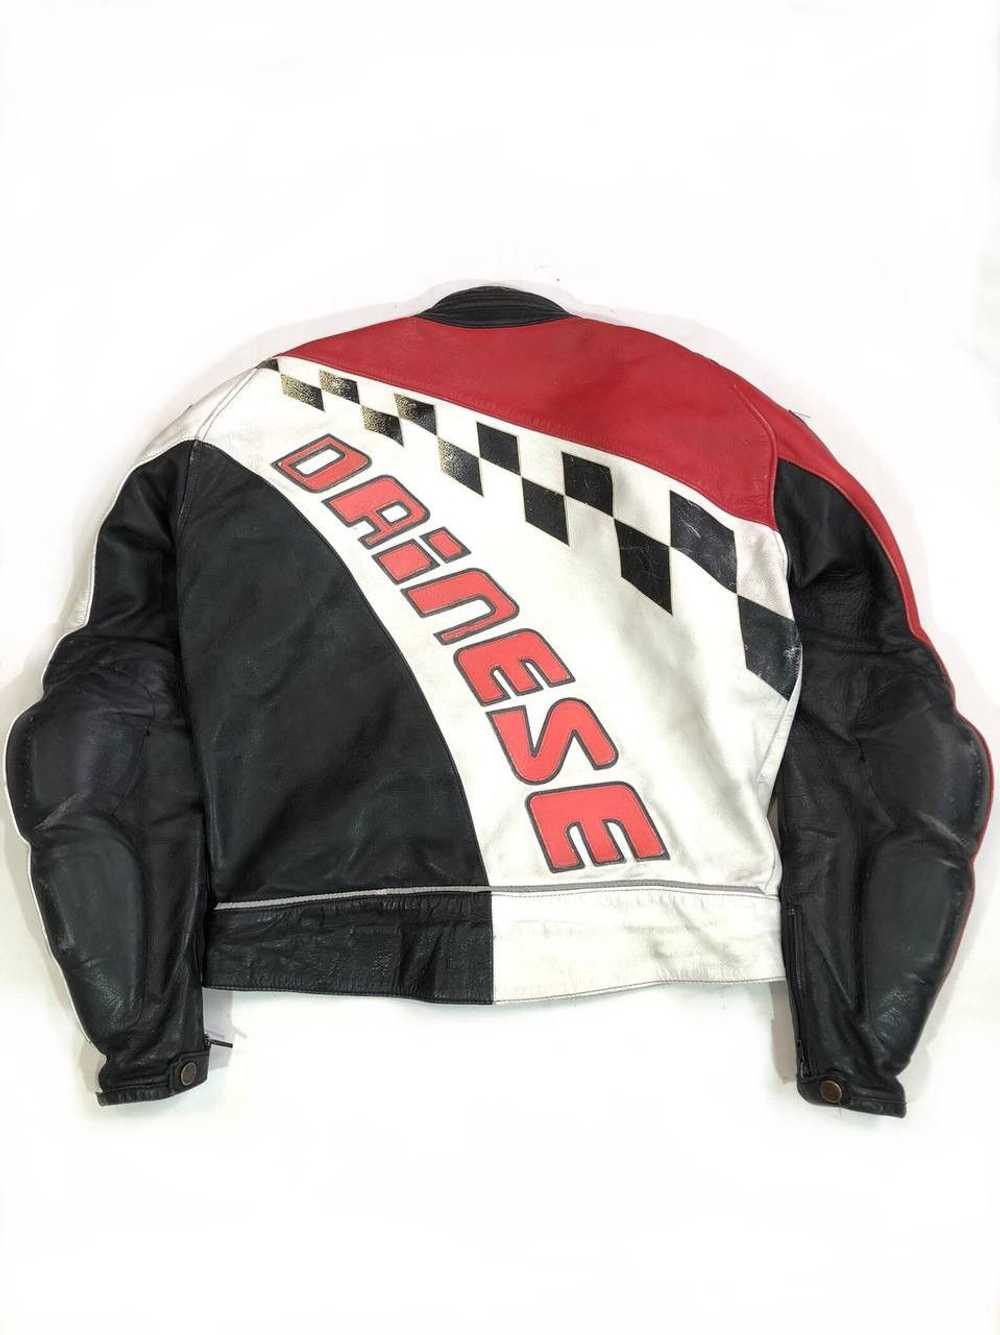 Dainese × Leather × Racing Dainese Ducati Moto Le… - image 2